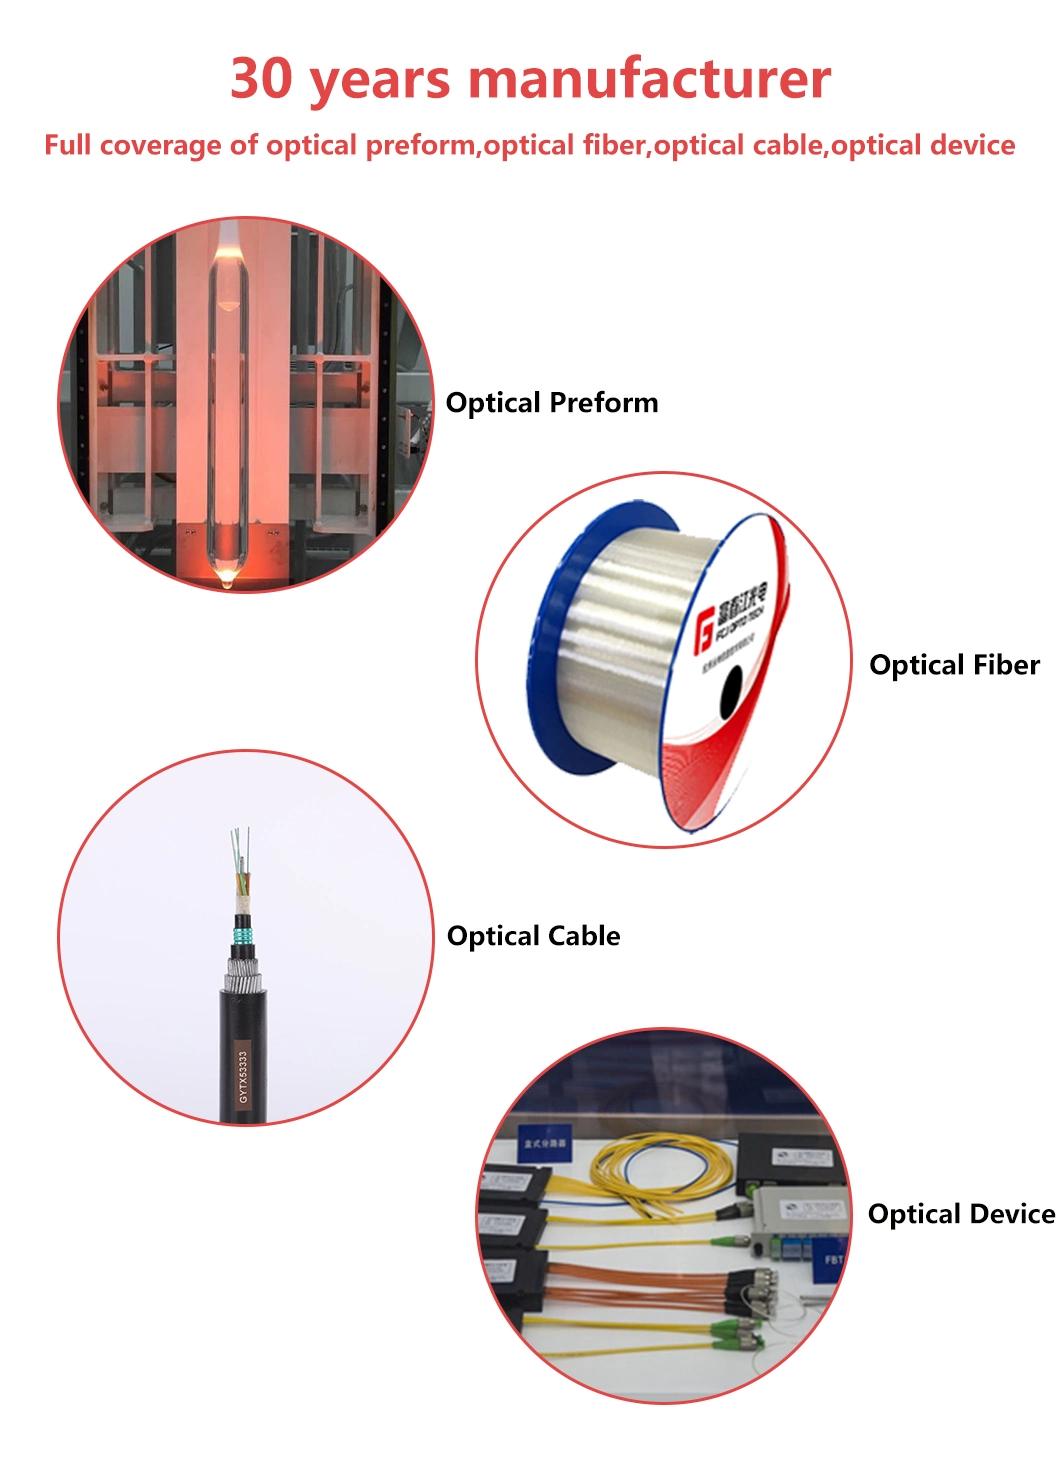 Wholesales Supplier Fiber Optic Cable for Customized High Quality MPO/MTP Patch Cord of Fuchunjiang